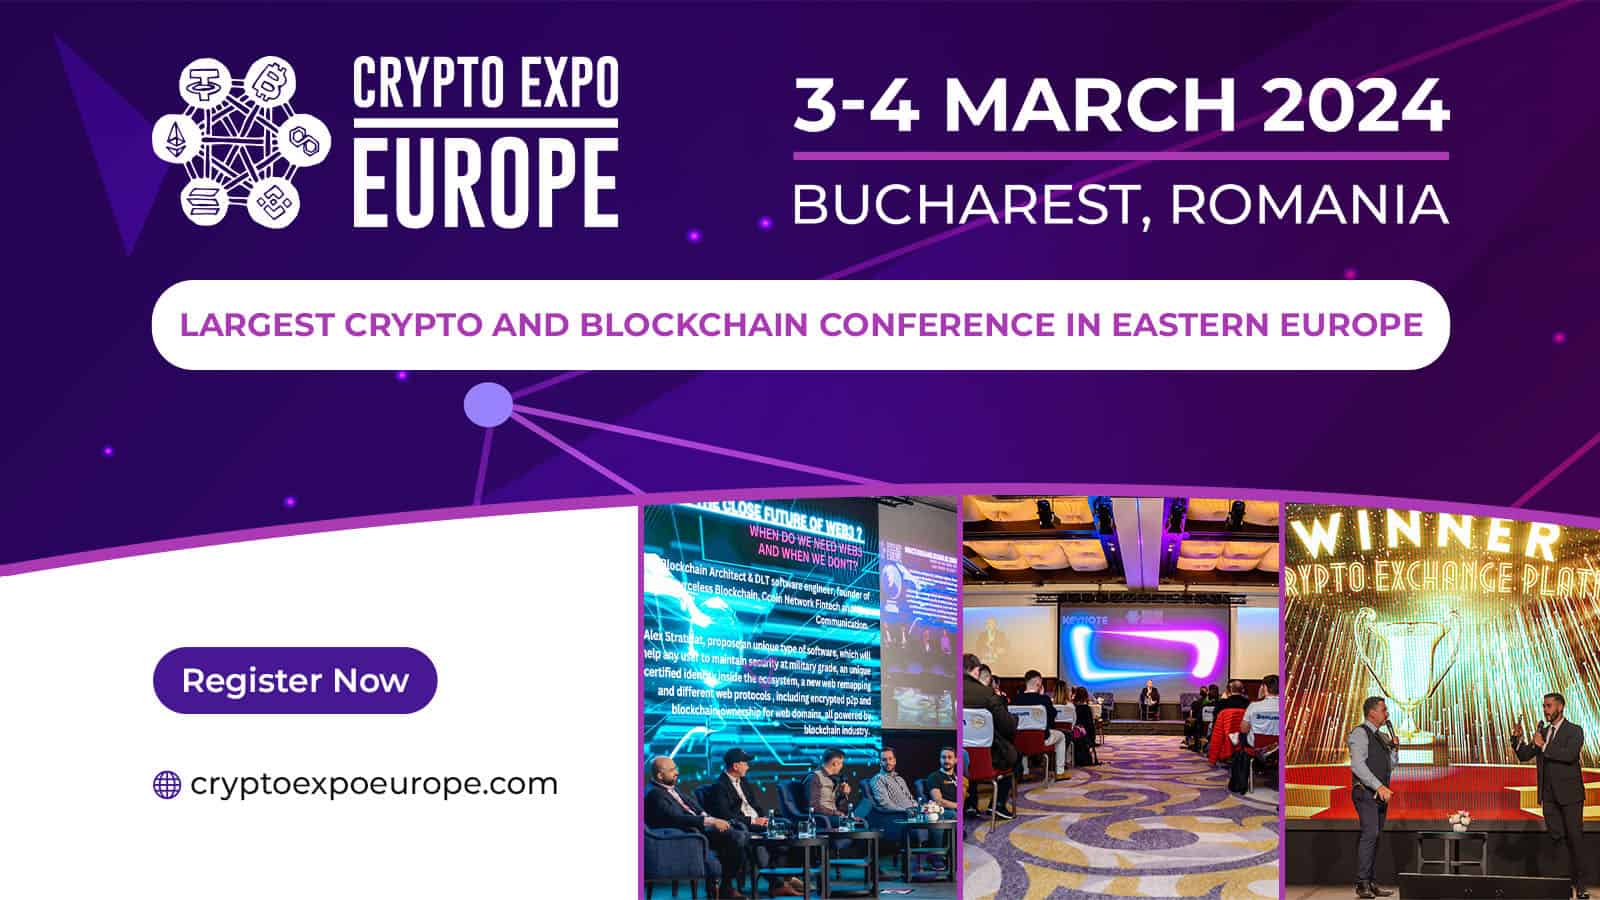 Bucharest, Romania, 3-4 March 2024 –– The highly anticipated Crypto Expo Europe (CEE) will take over the luxurious Radisson Blu Hotel in Bucharest, Romania on March 3. The two-day event, the largest crypto and blockchain conference in Eastern Europe, is expected to attract over 3,000 attendees including leading lights from the worlds of tech and crypto, as well as institutions, regulators, entrepreneurs, and avid Web3 enthusiasts.